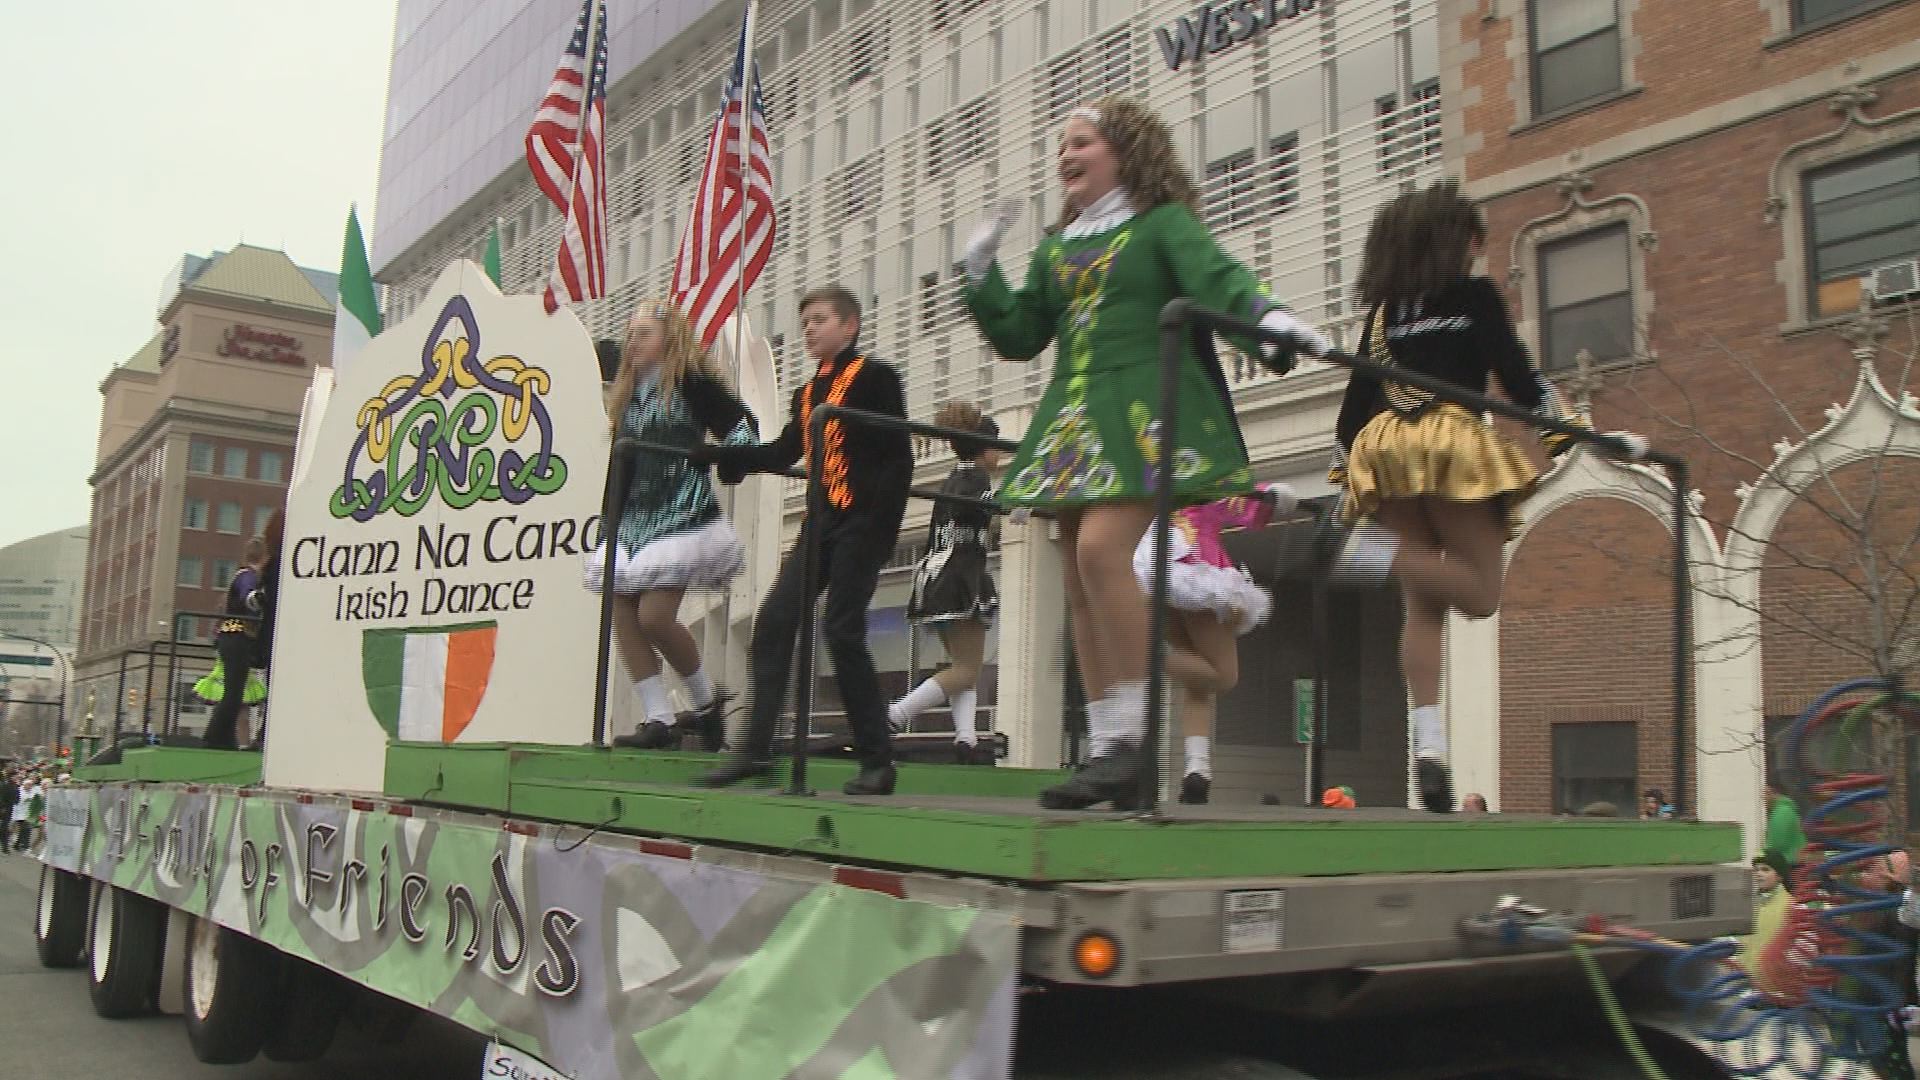 Forventning omgivet gjorde det Buffalo ranked one of the top cities for St. Patrick's Day | wgrz.com